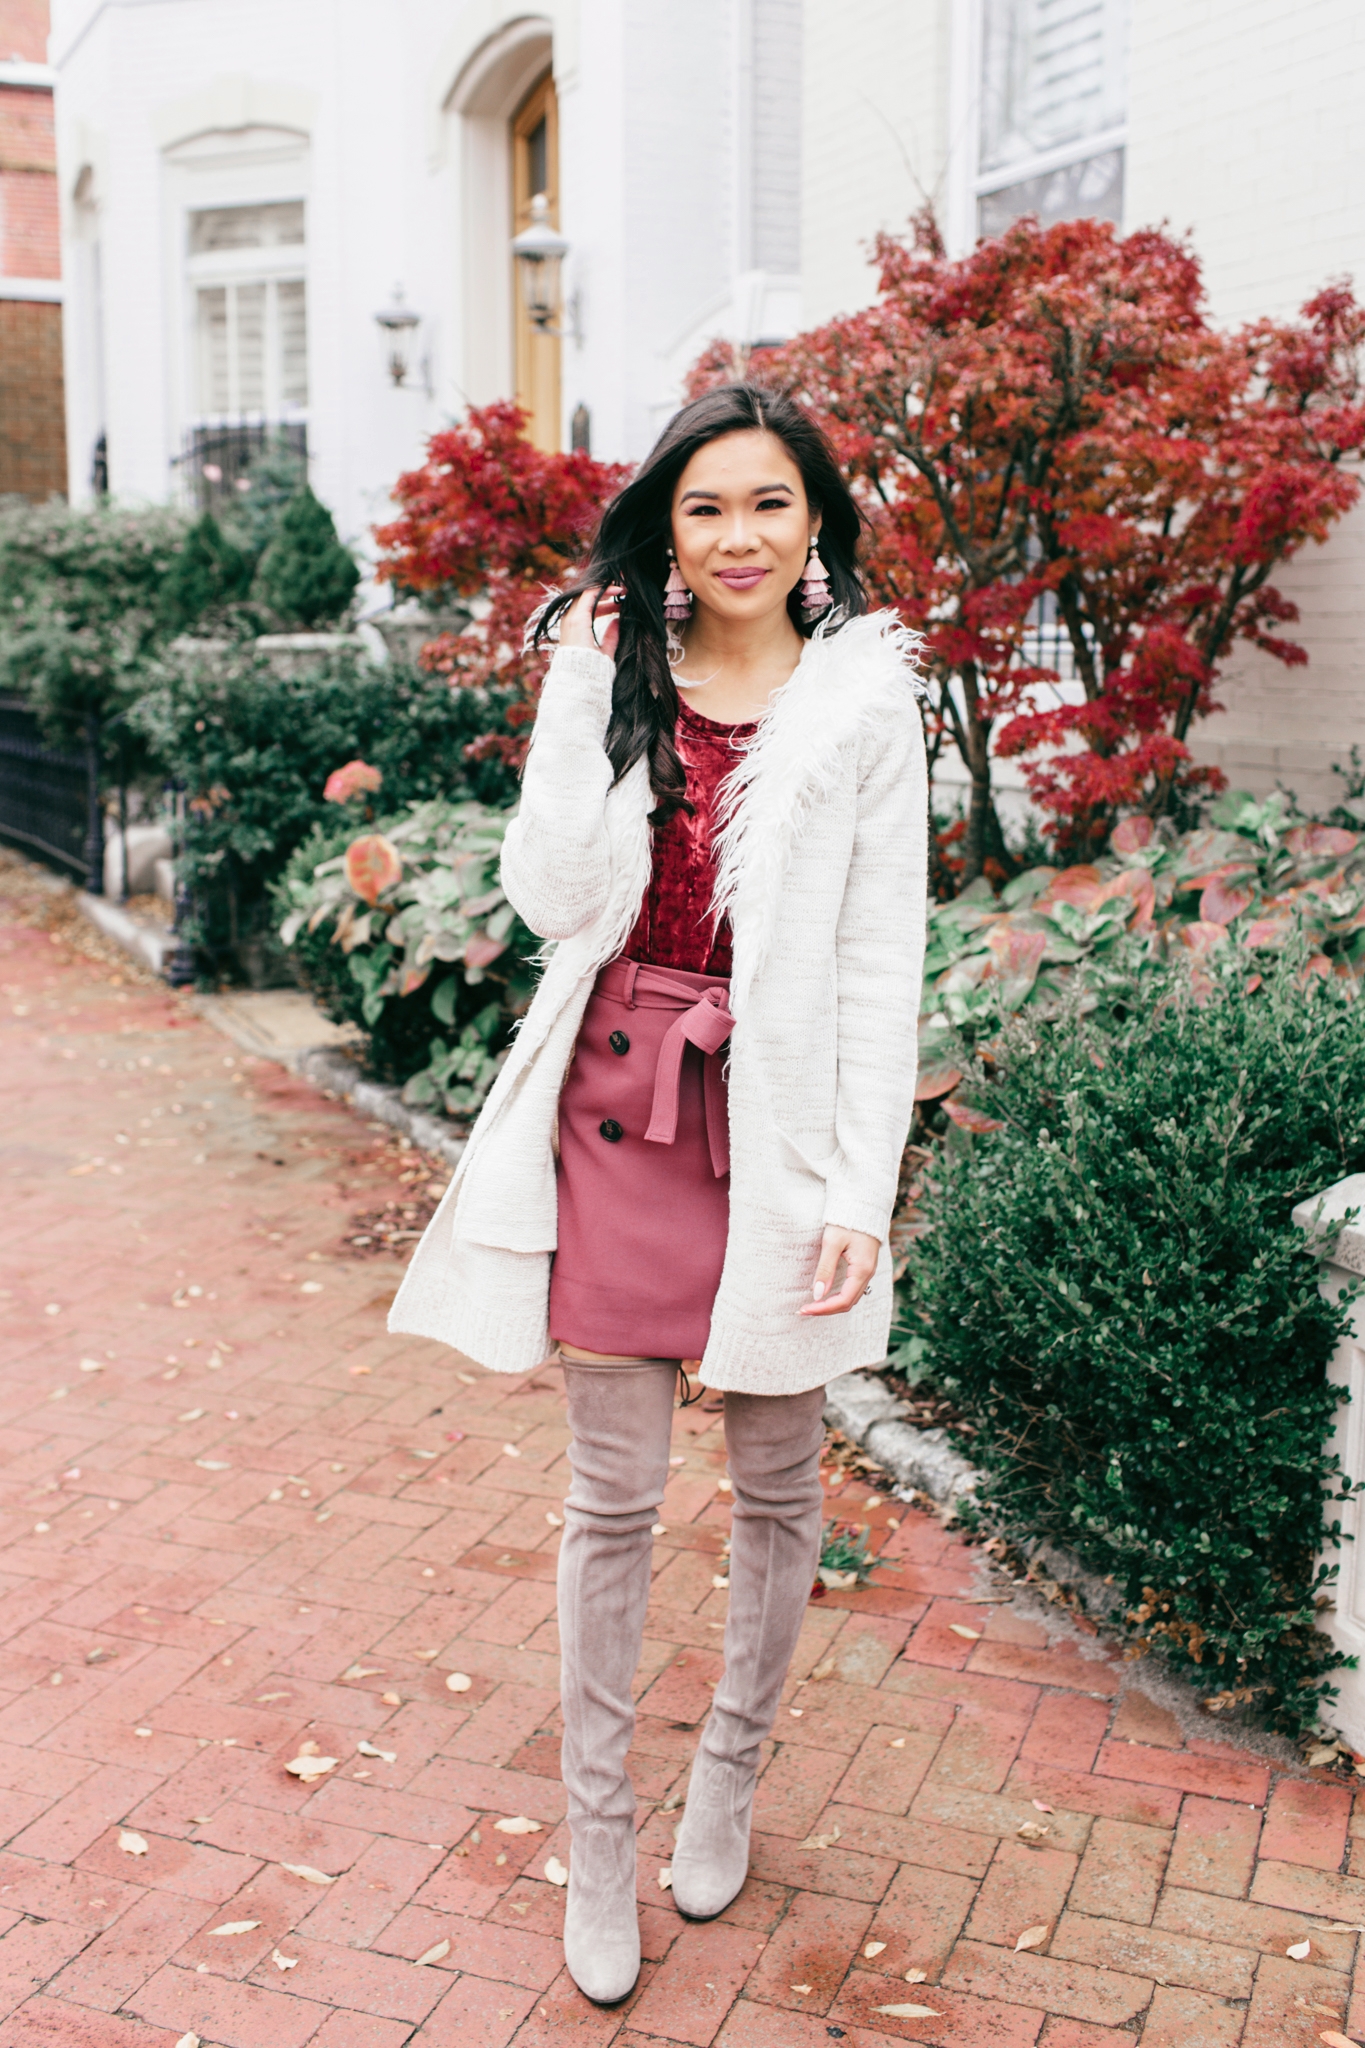 Roadie Sweater with faux fur collar and Saigon Tassel Earrings over a trench skirt